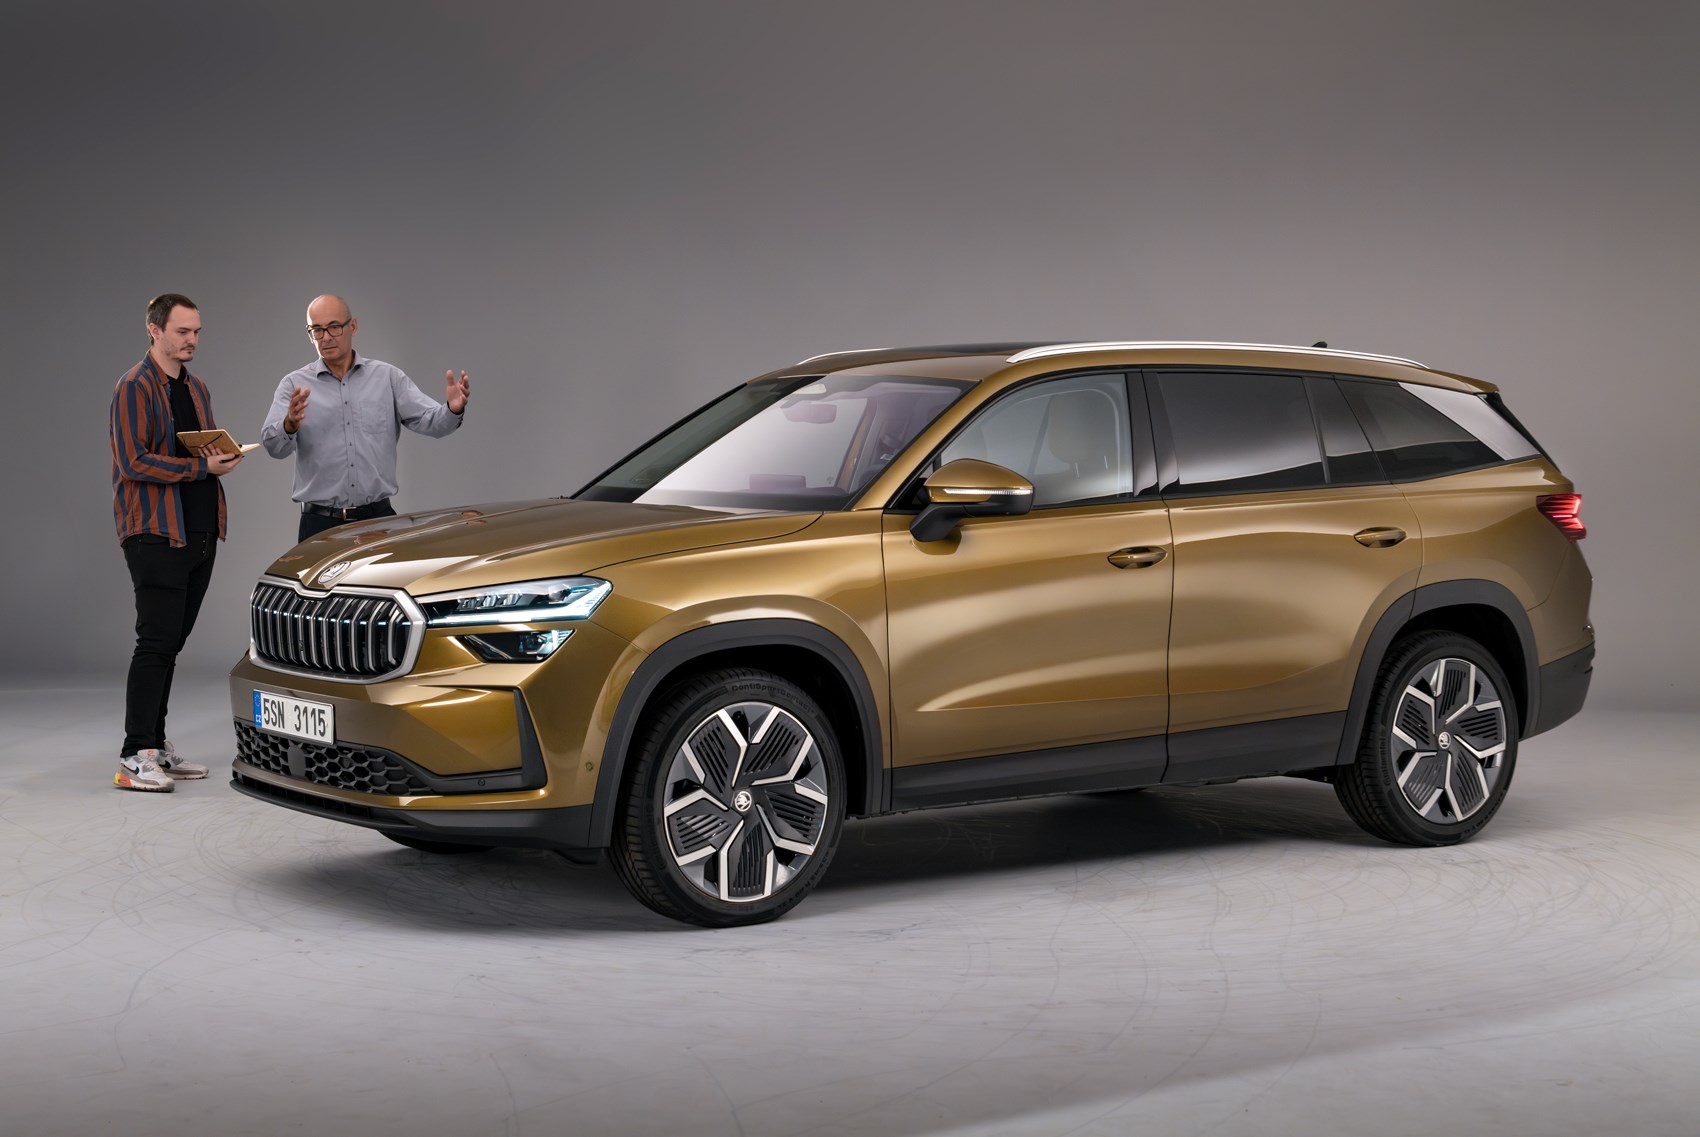 New Skoda Kodiaq revealed: the most complete family car… ever?